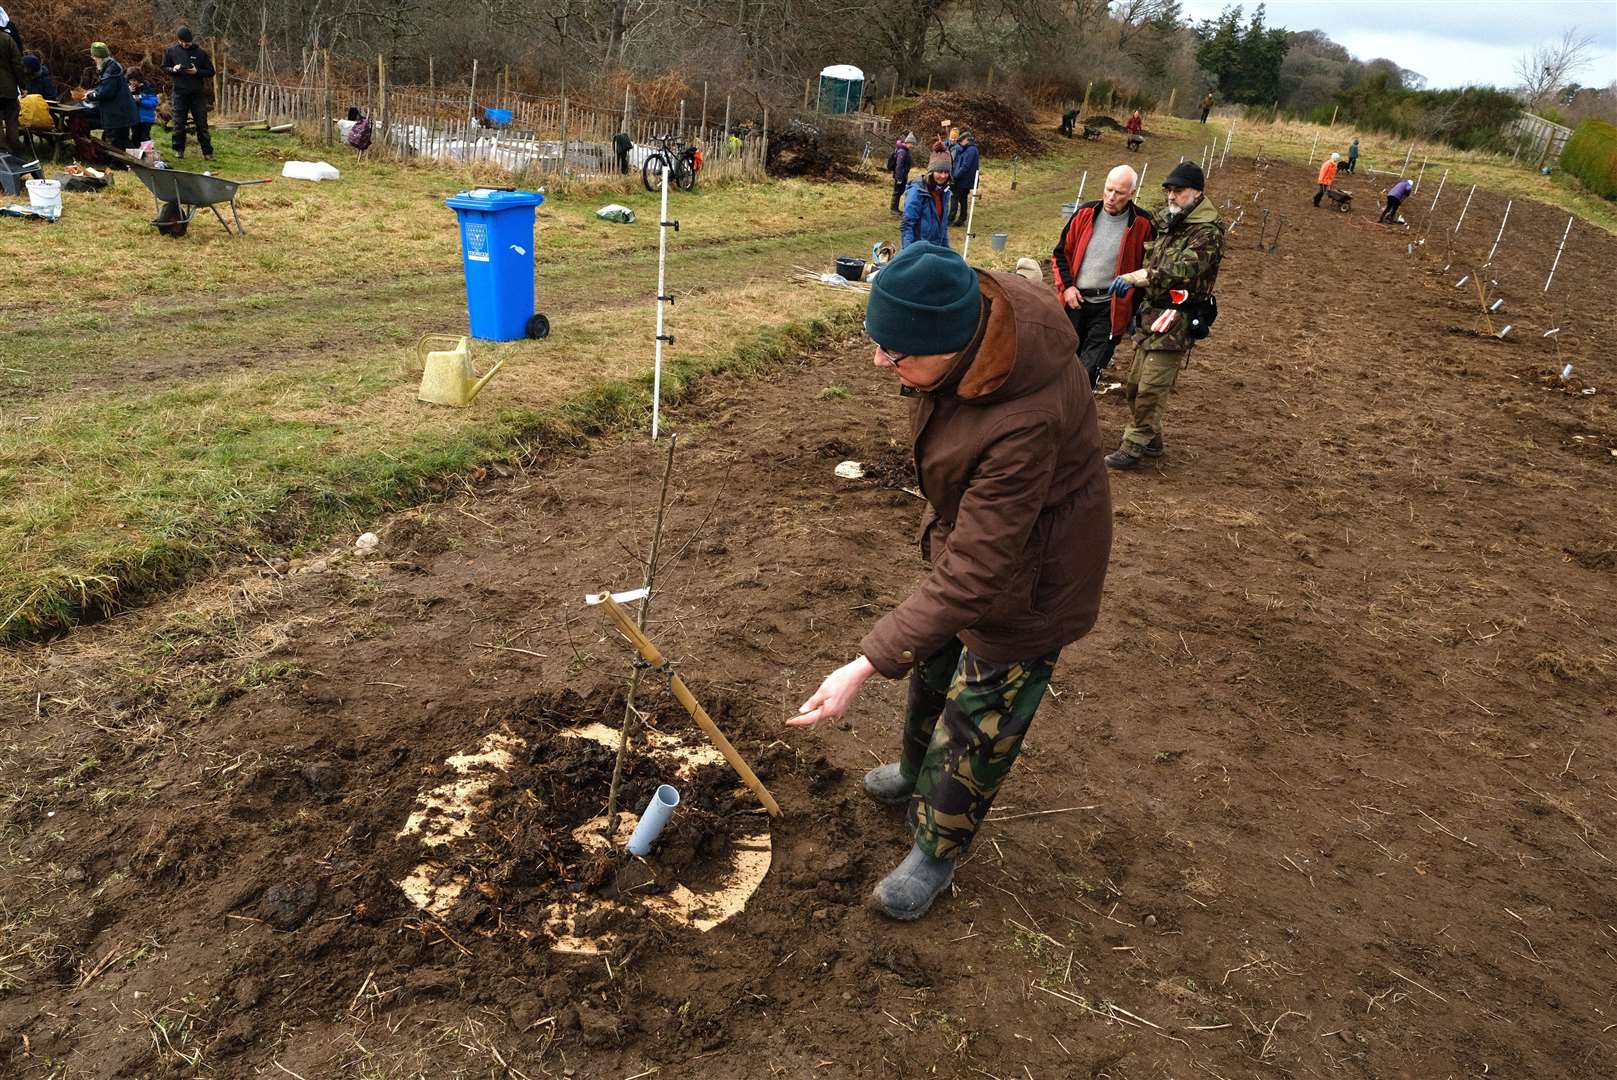 Approximately 40 trees for the orchard were planted during the day, many donated by Findhorn Bay Arts through the Dandelion Unexpected Gardens growing project.